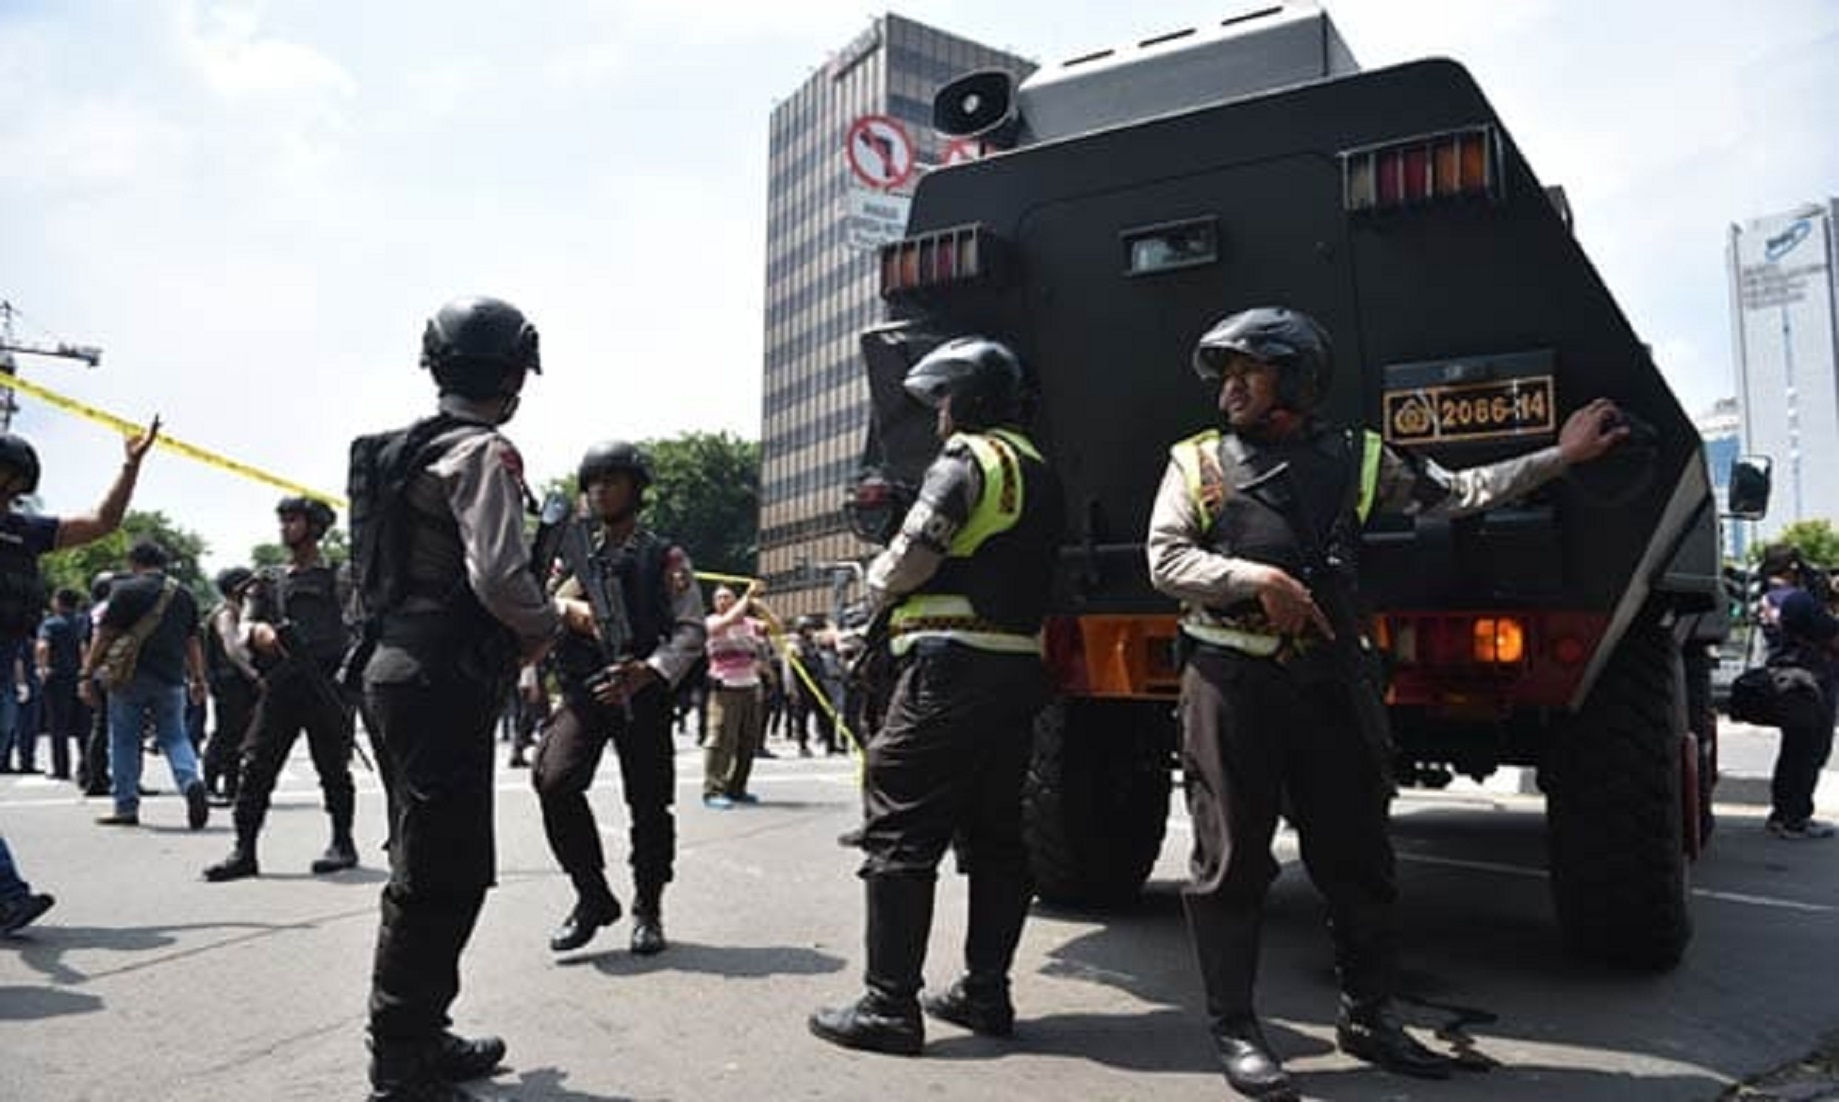 More demonstrations in Jakarta, COVID-19 cases in Indonesia now 340,622